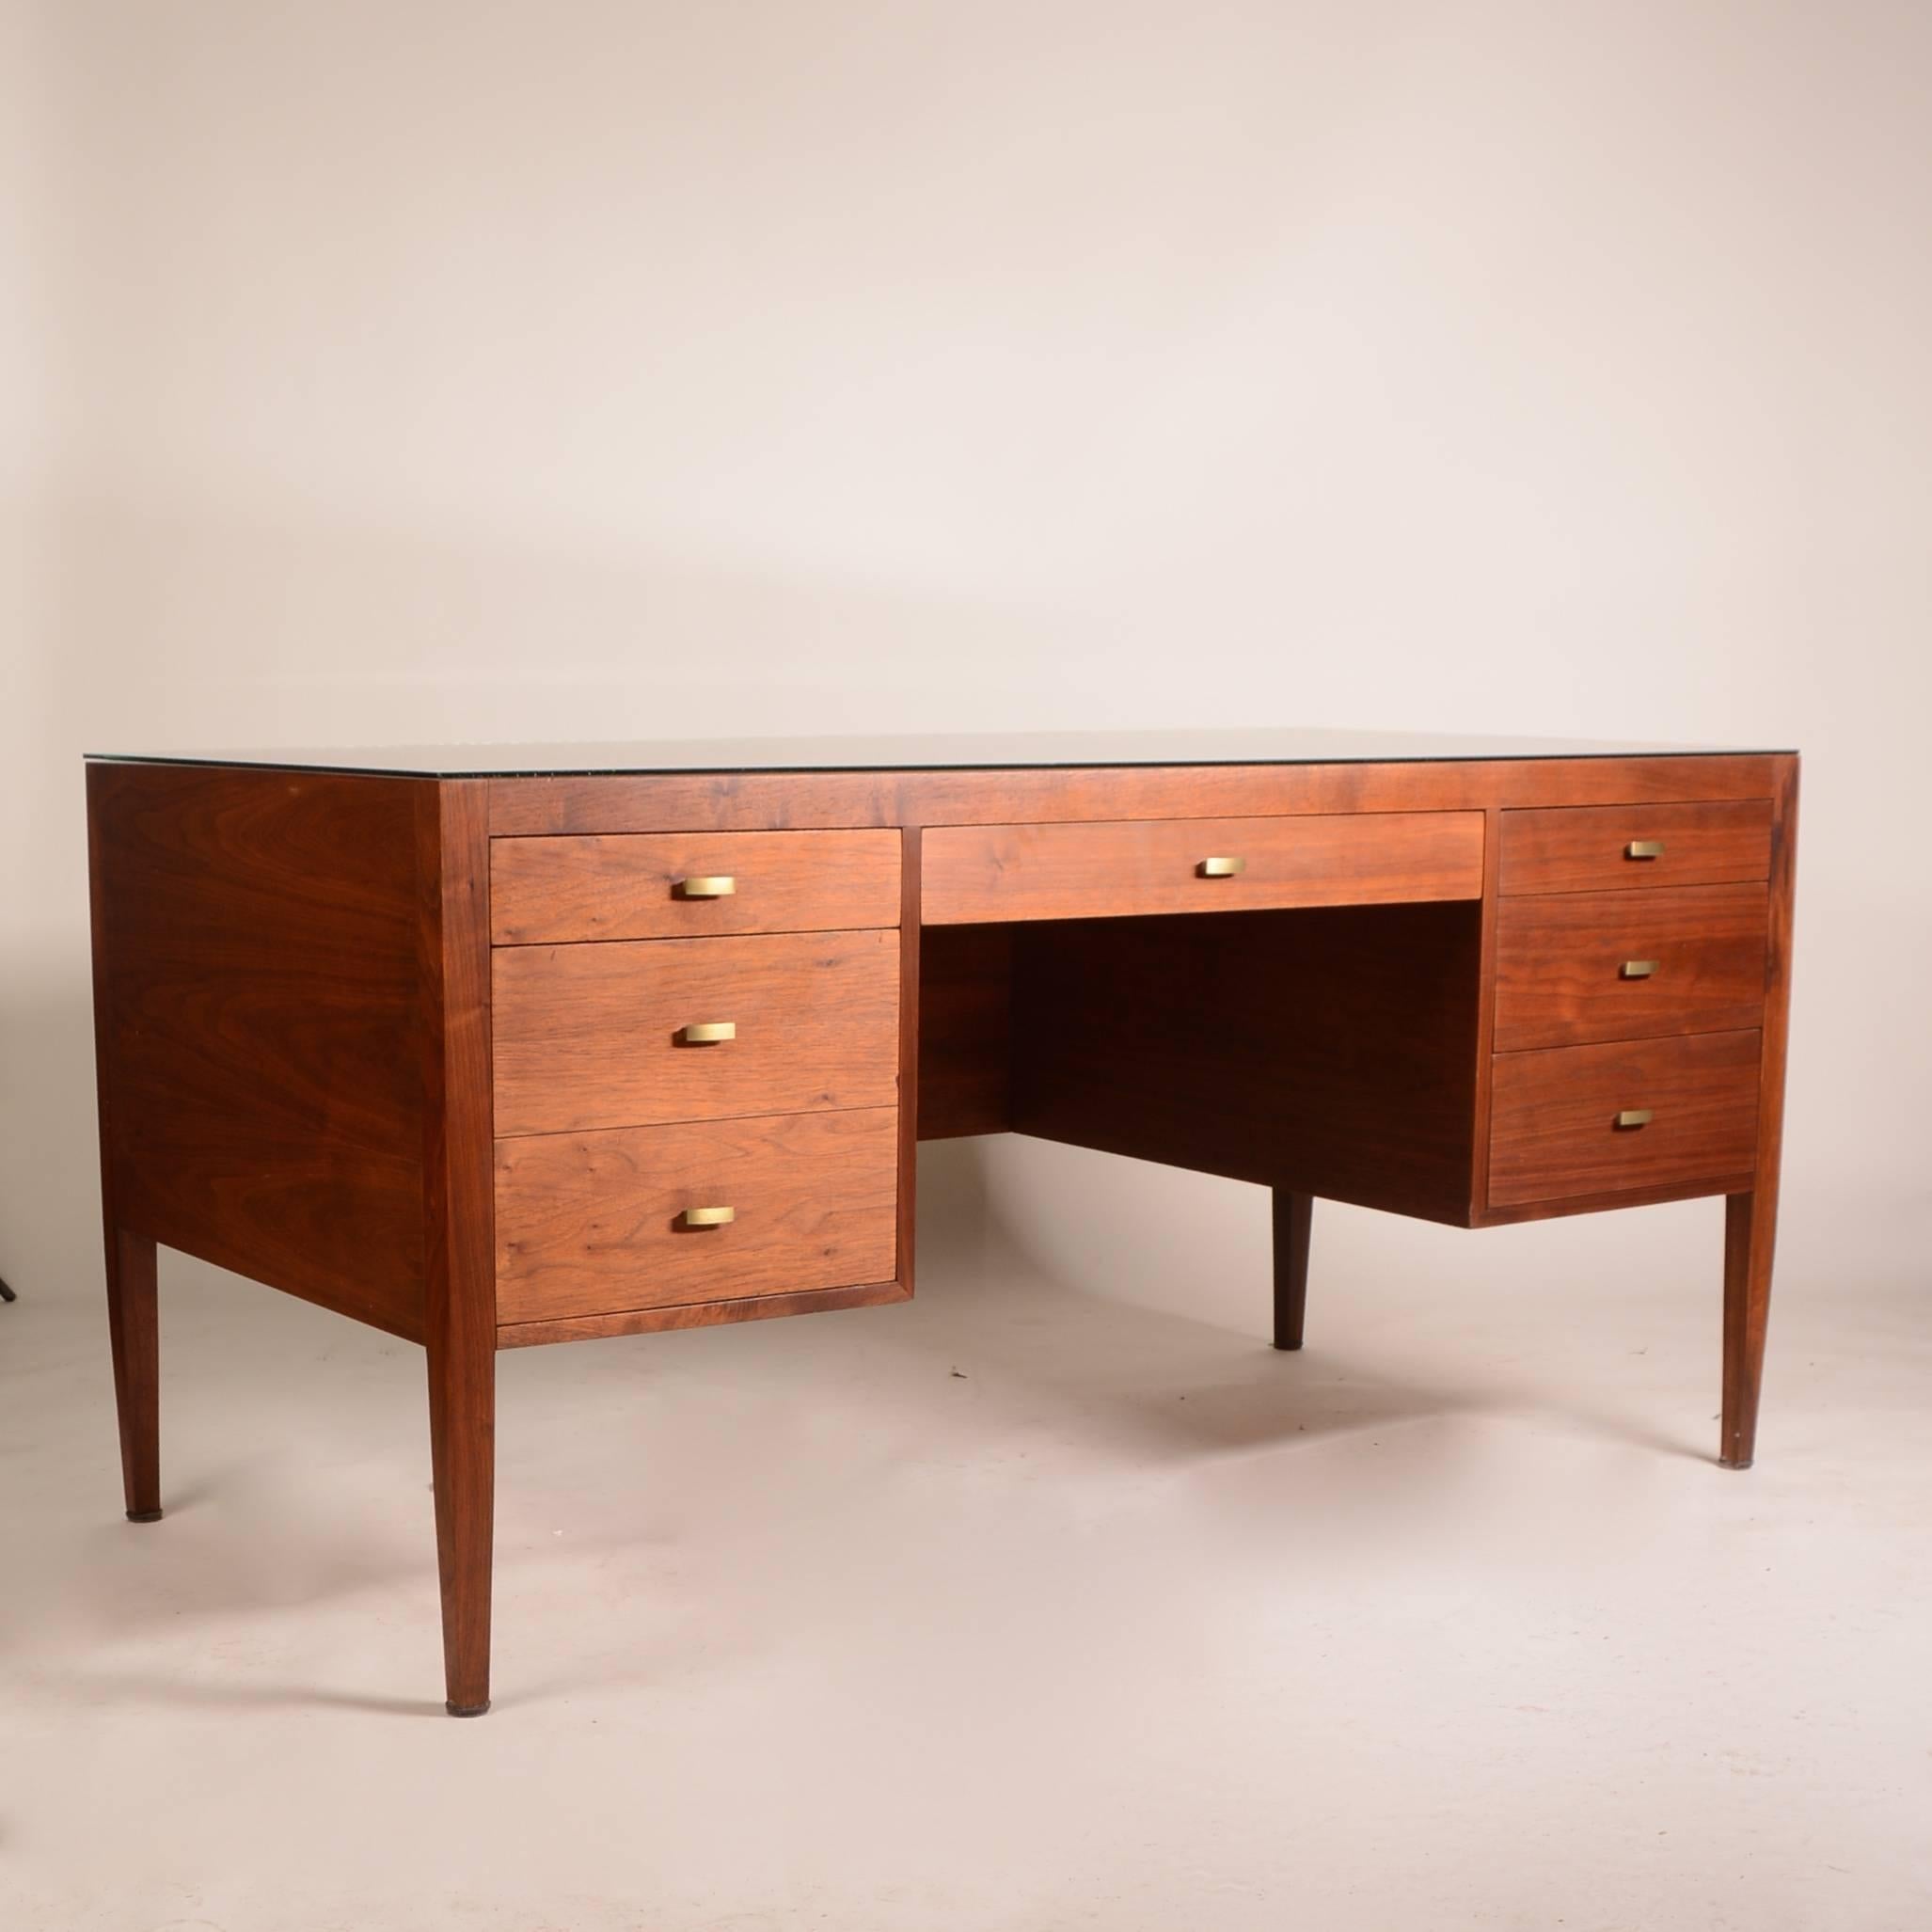 This elegant French modern custom desk is in excellent condition. Beautifully designed and expertly crafted this piece will not only last another 60 years it will always be in style. To view in person please visit us at our new location in the Arts